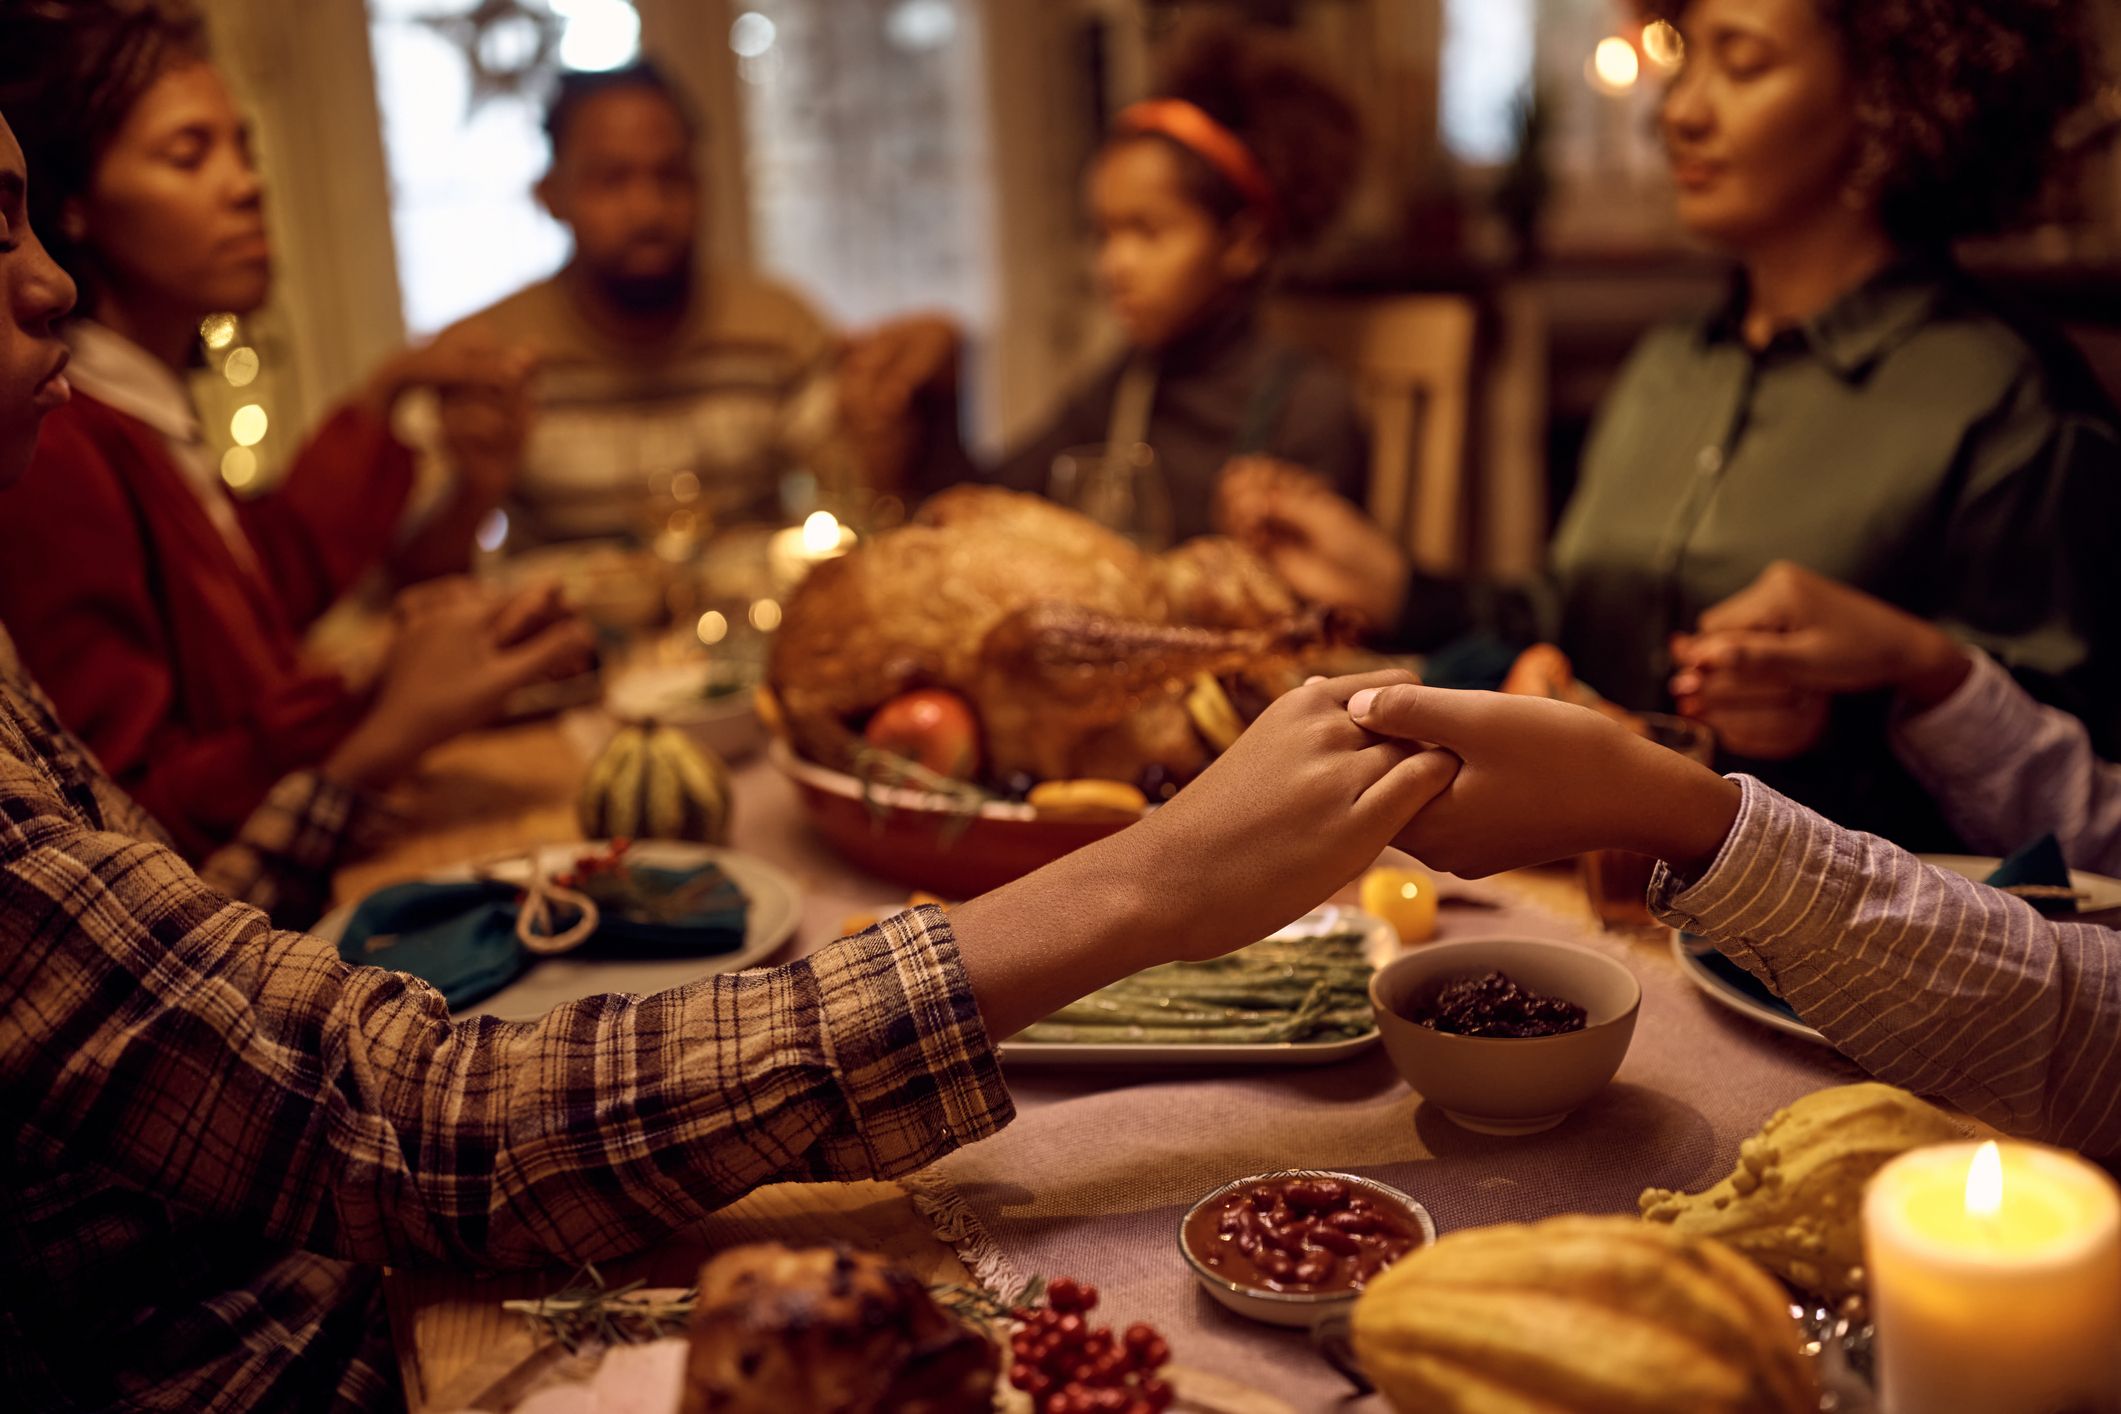 What is Thanksgiving? It's Meaning and Why We Celebrate